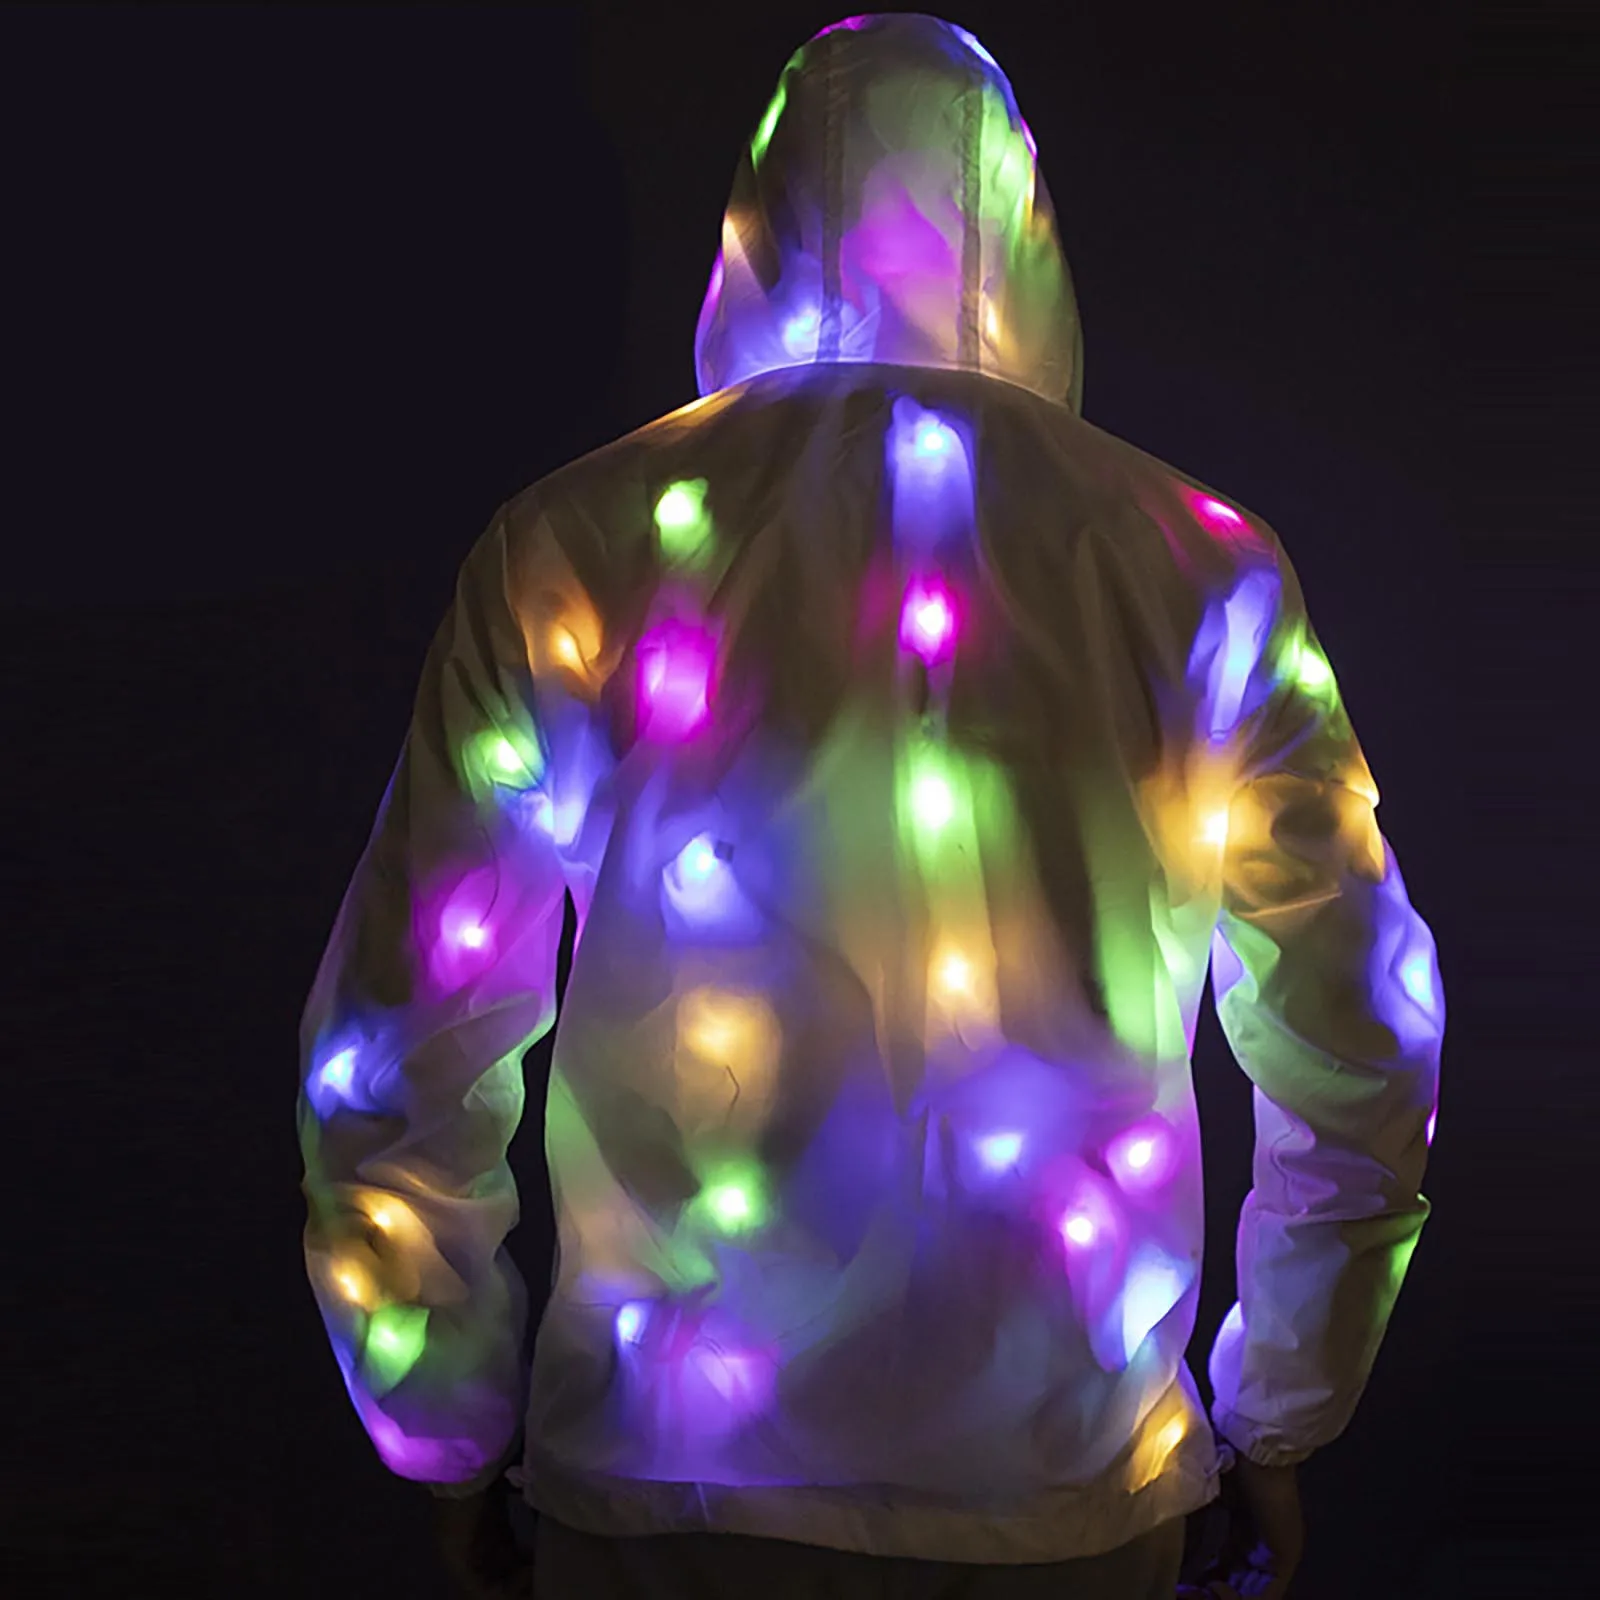 

2022 New Women Led Glowing Coat Valentine Gift Led Multi-color Warm Hoodie Vest With Shiny Lights Jacket Light Up Funny Costum